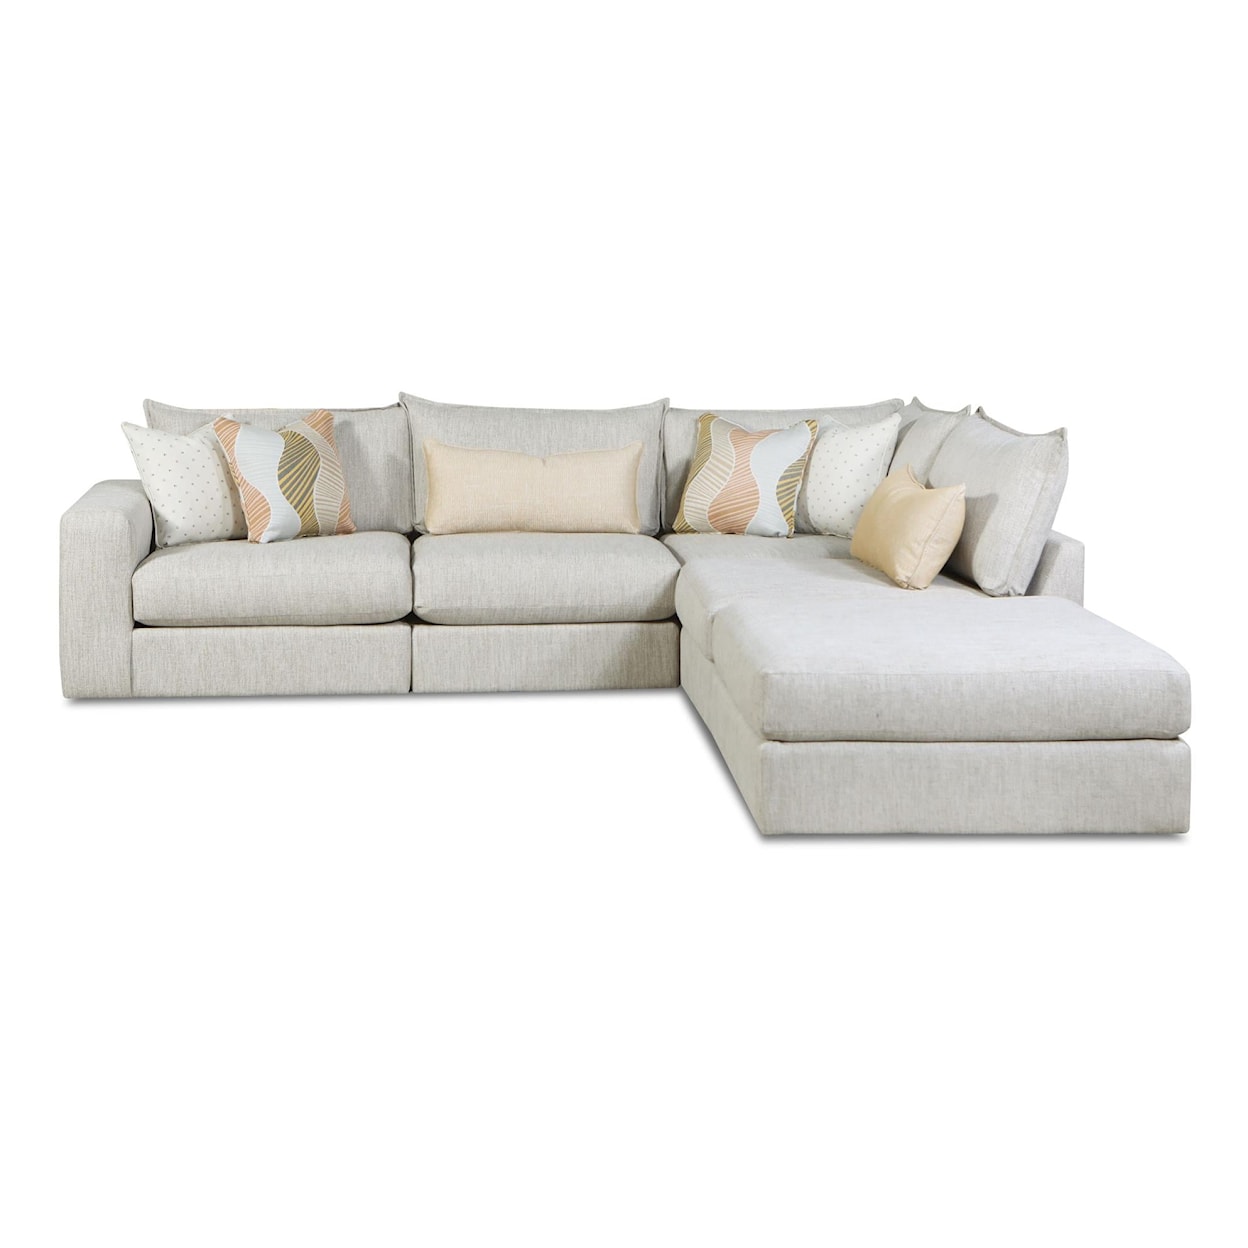 Fusion Furniture 7000 LOXLEY COCONUT Sectional